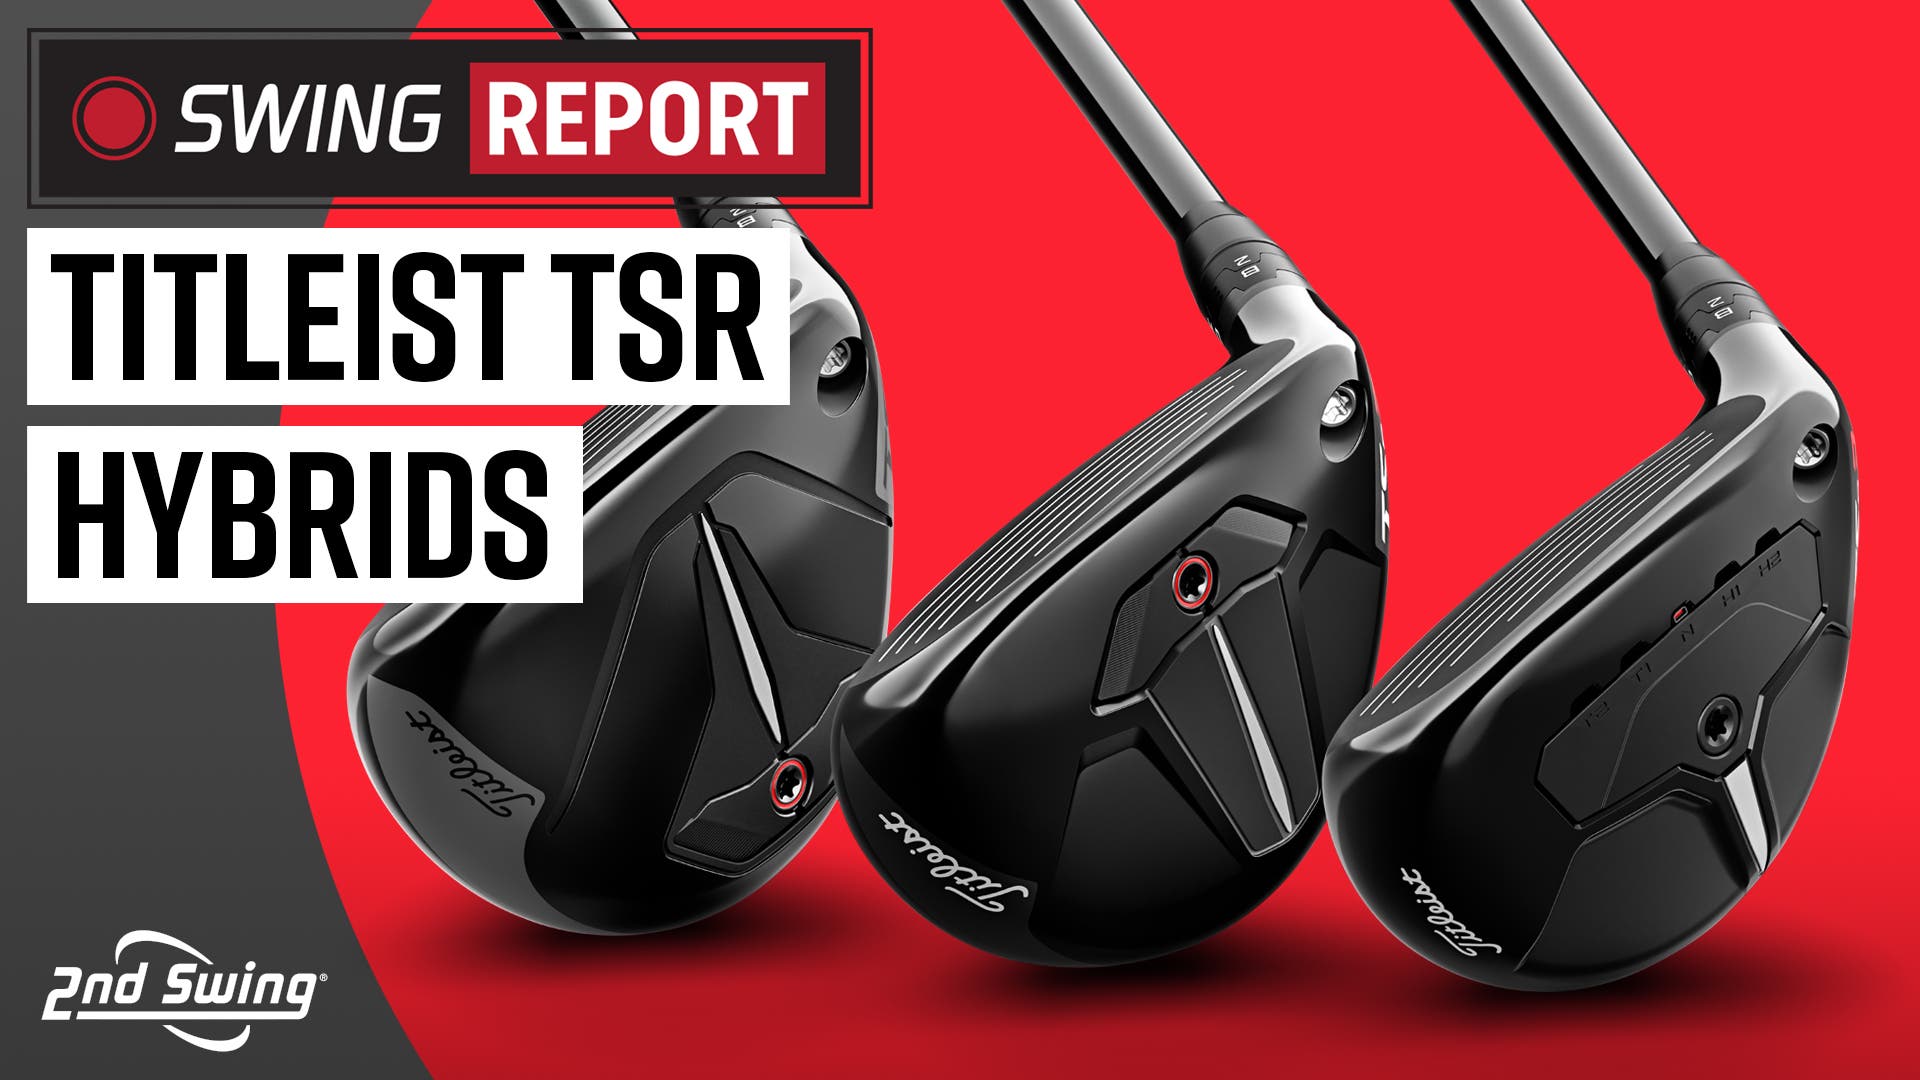 The Highest-Launching, Most Explosive Titleist Hybrids Ever